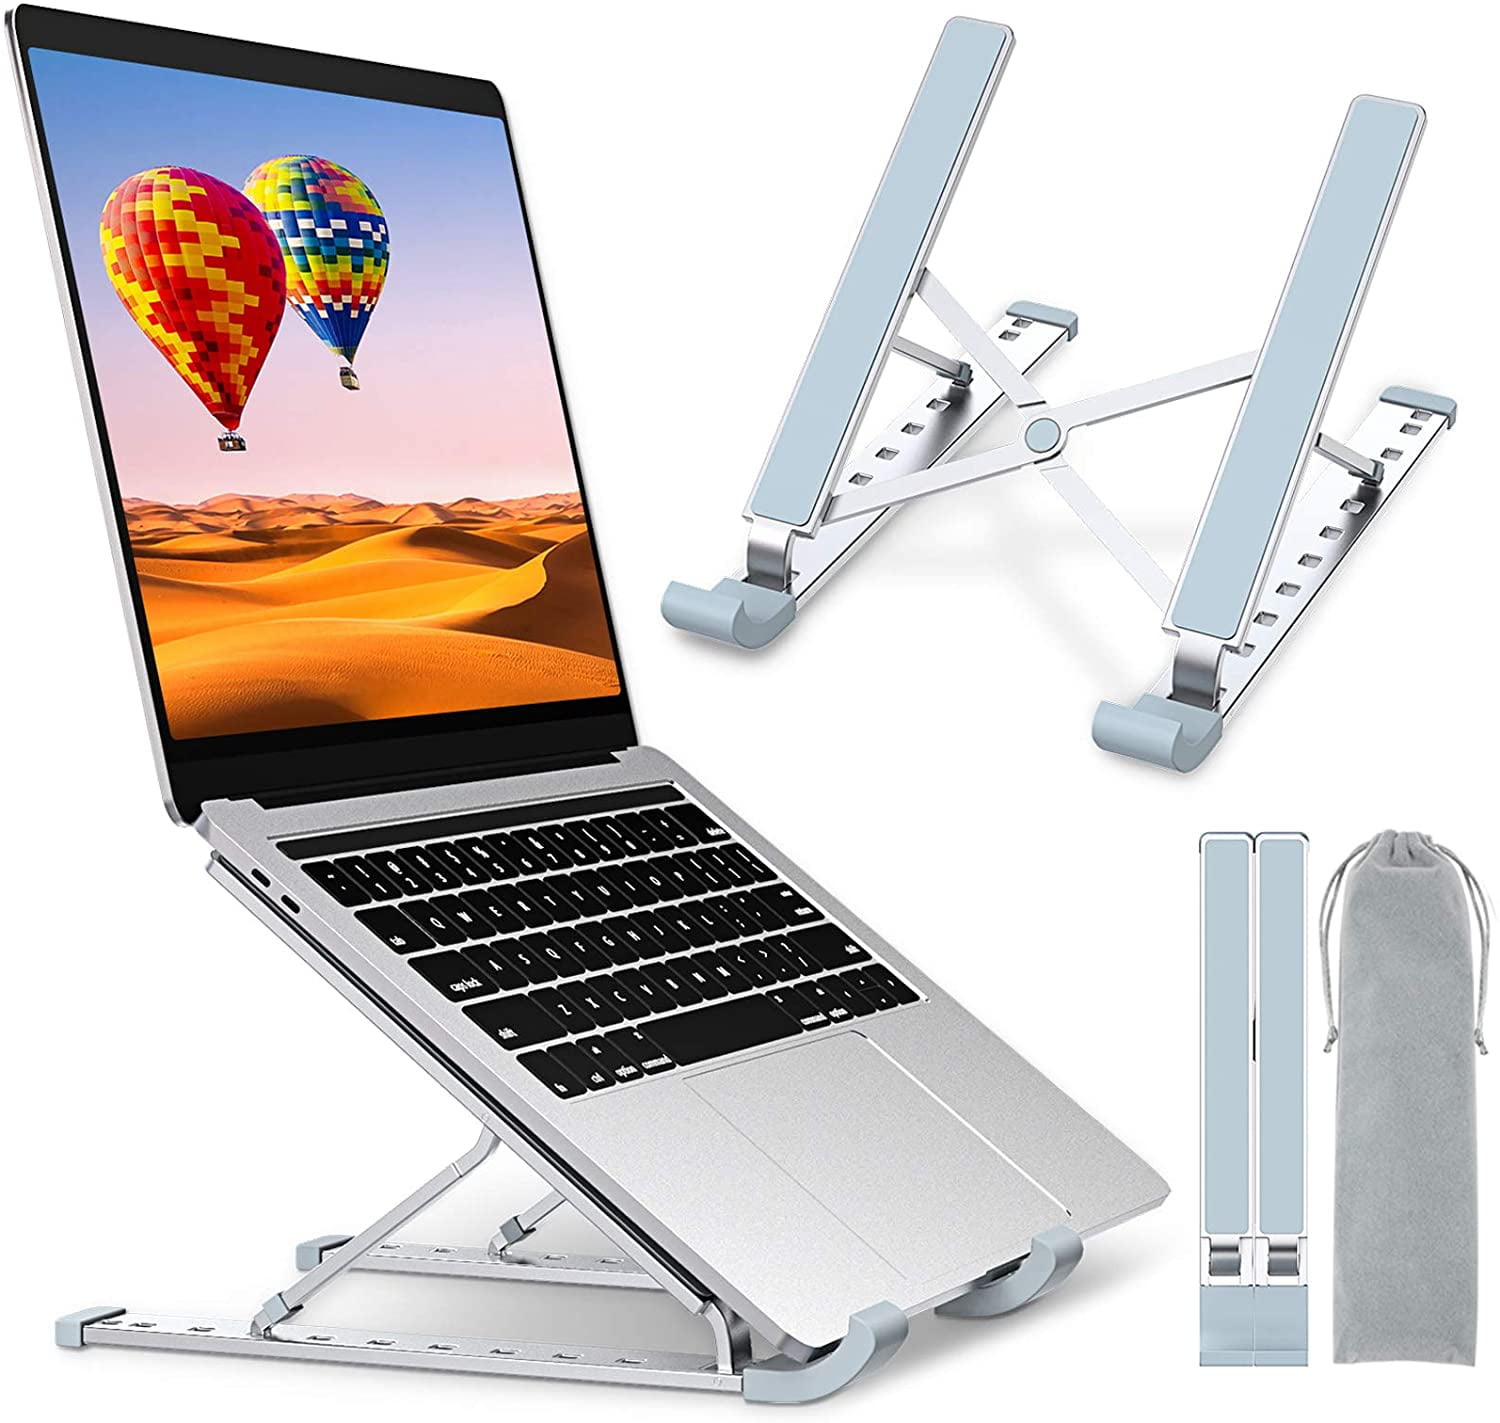 More 10-17 Inch Acer,Lenovo Dell HP Silver MZHOU Laptop Stand,Aluminum Alloy Computer Riser,9-Angles Adjustable Ventilated Notebook Desk Stand Mount Metal Holder Compatible with MacBook Pro Air 